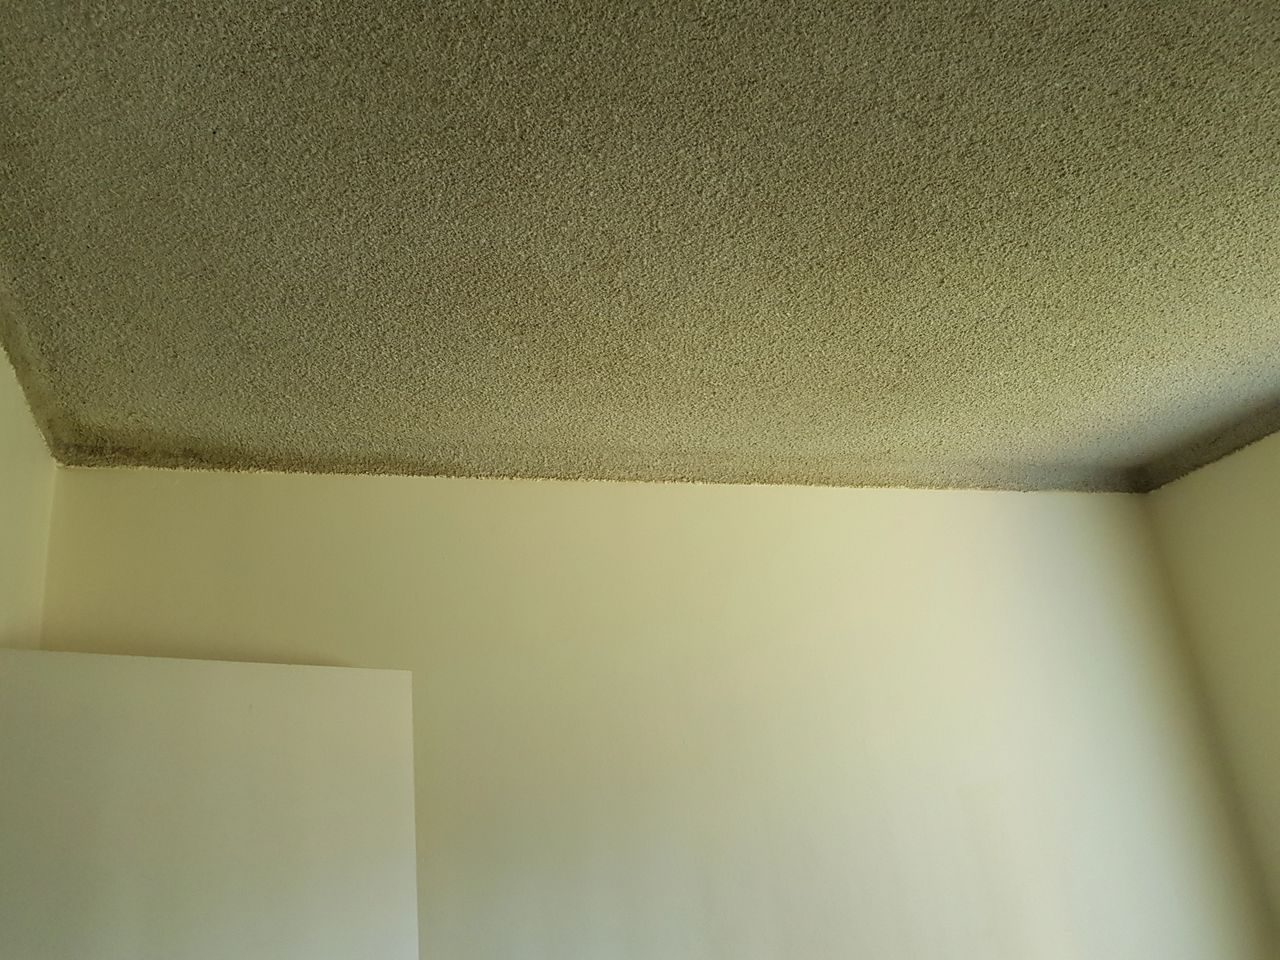 An unpainted vermiculite ceiling in an old apartment unit - Sydney